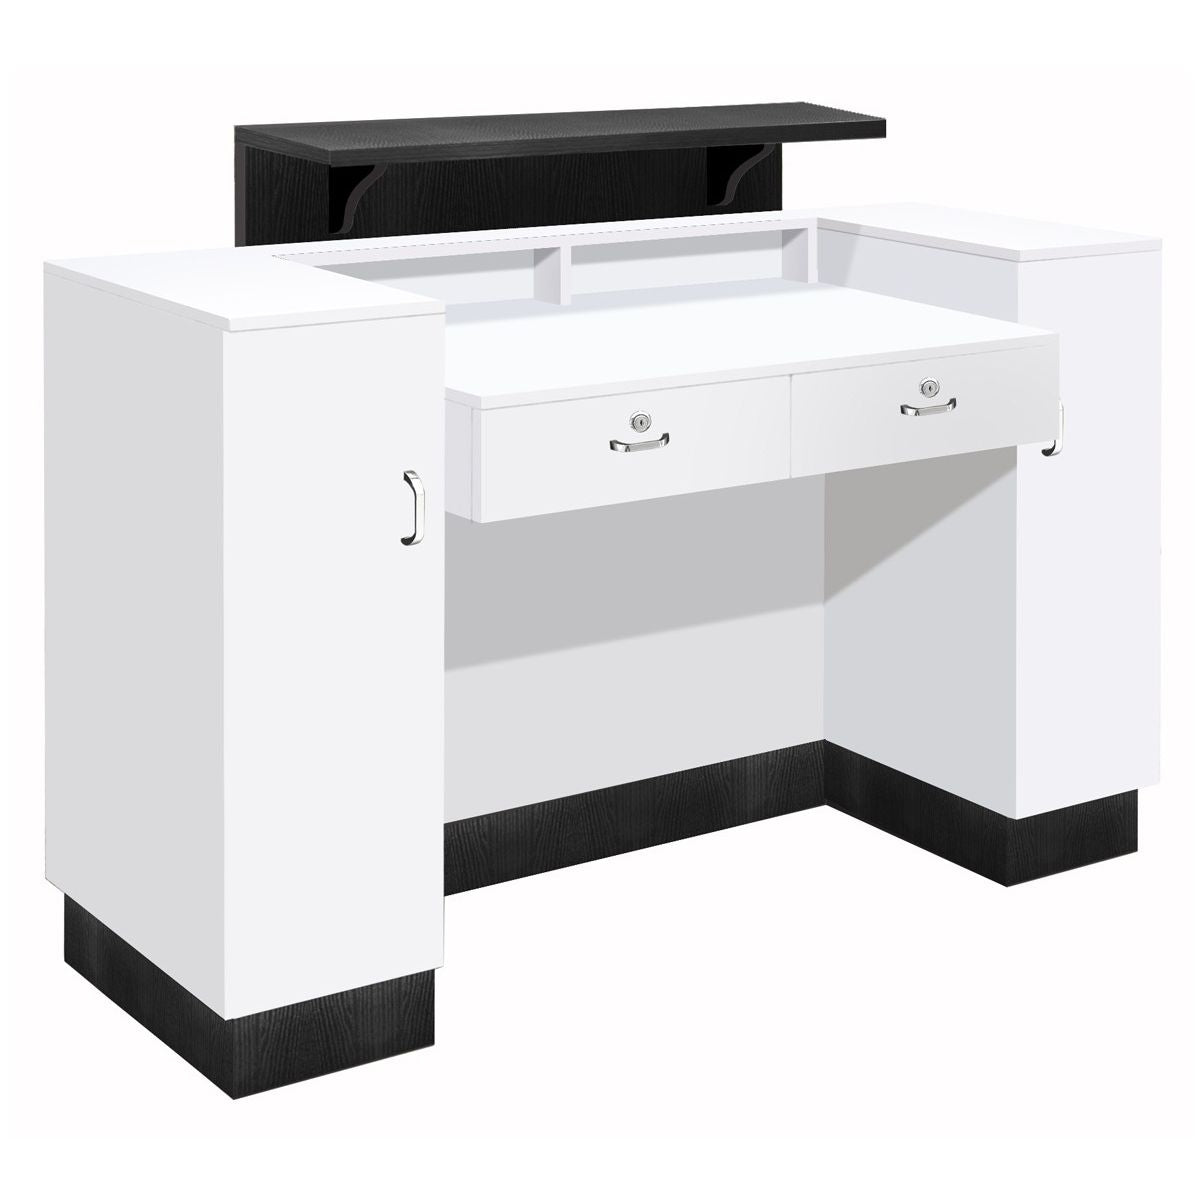 Whale Spa Whale Spa SC06 Reception Desk with Free Nail Salon Task Stool Reception Desk - ChairsThatGive